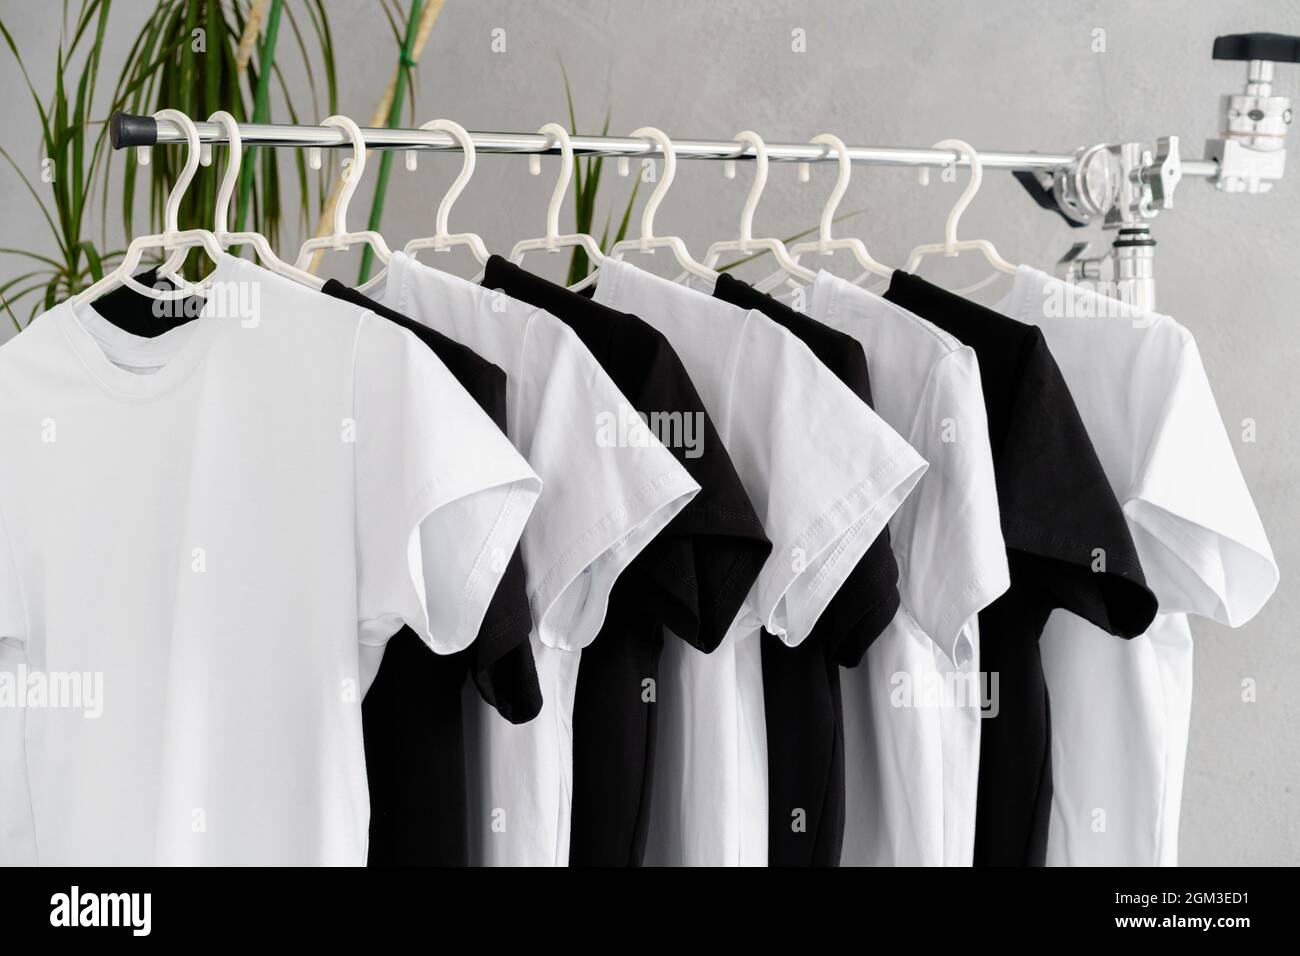 Row of black and white t-shirts hanging on rack Stock Photo - Alamy